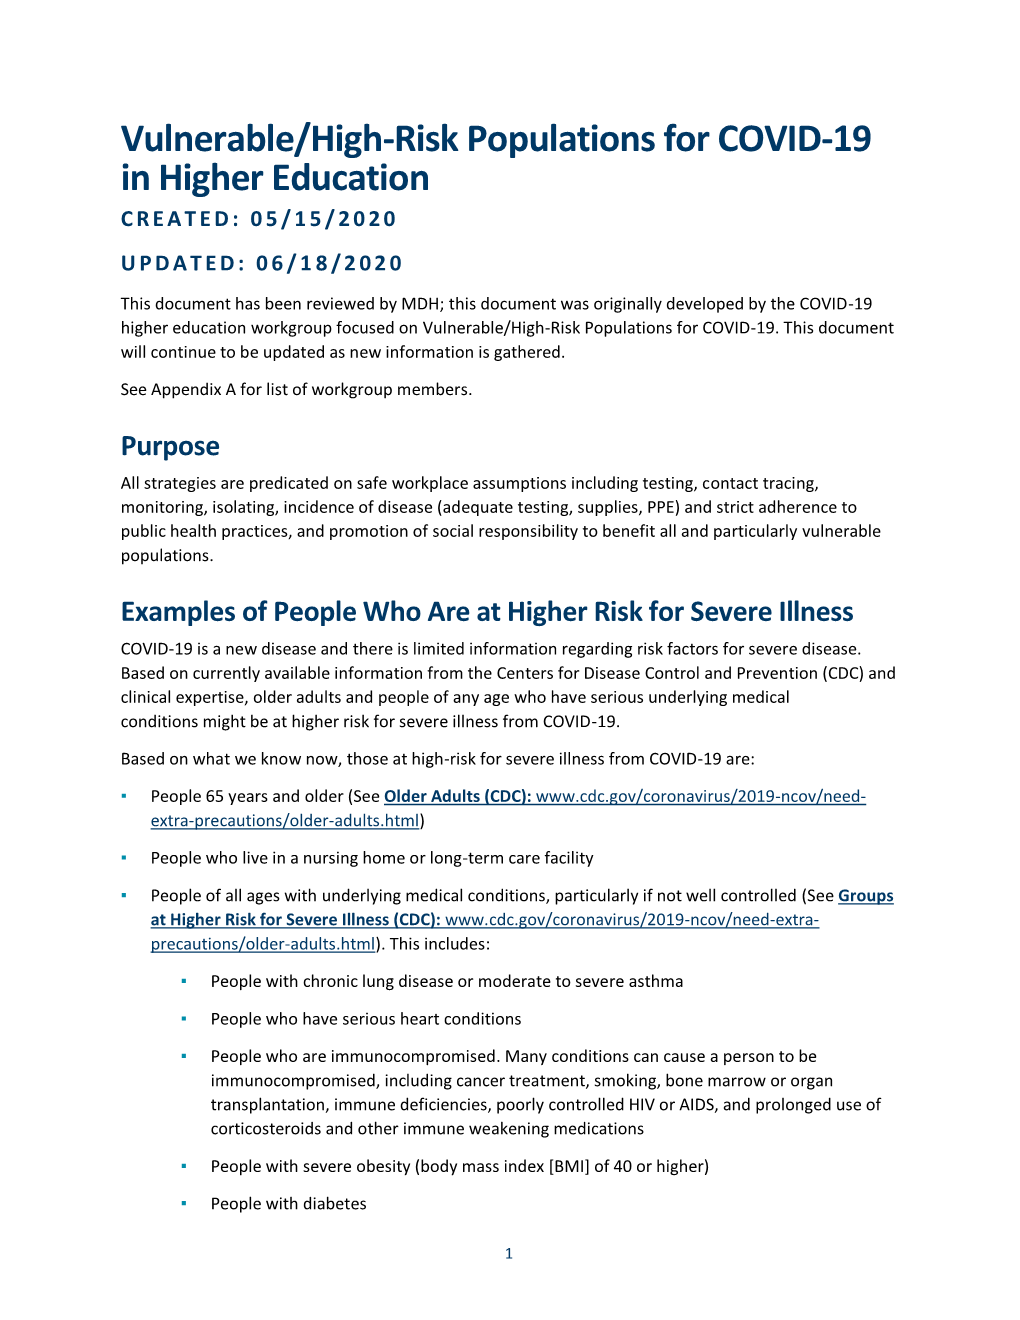 Vulnerable/High-Risk Populations for COVID-19 in Higher Education CREATED: 05/15/2020 UPDATED: 06/1 8 /2 0 2 0